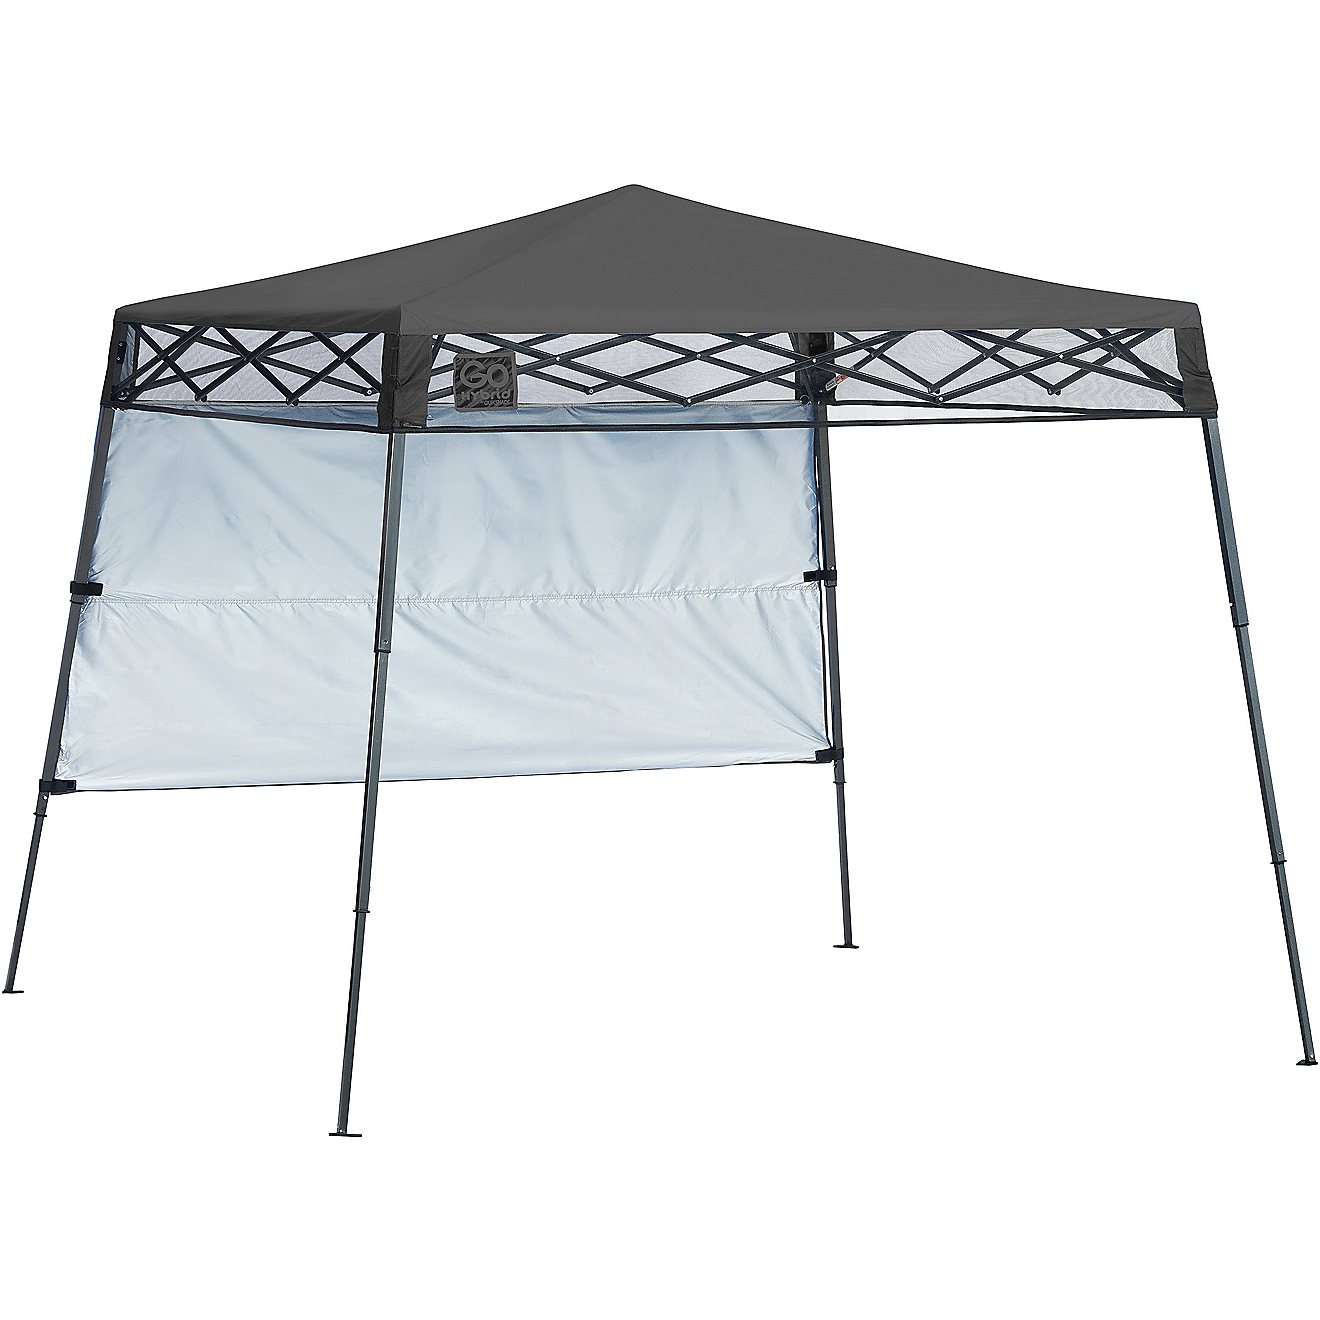 ShelterLogic Go Hybrid 7 ft x 7 ft Slant-Leg Pop-Up Canopy with Half Wall                                                        - view number 1